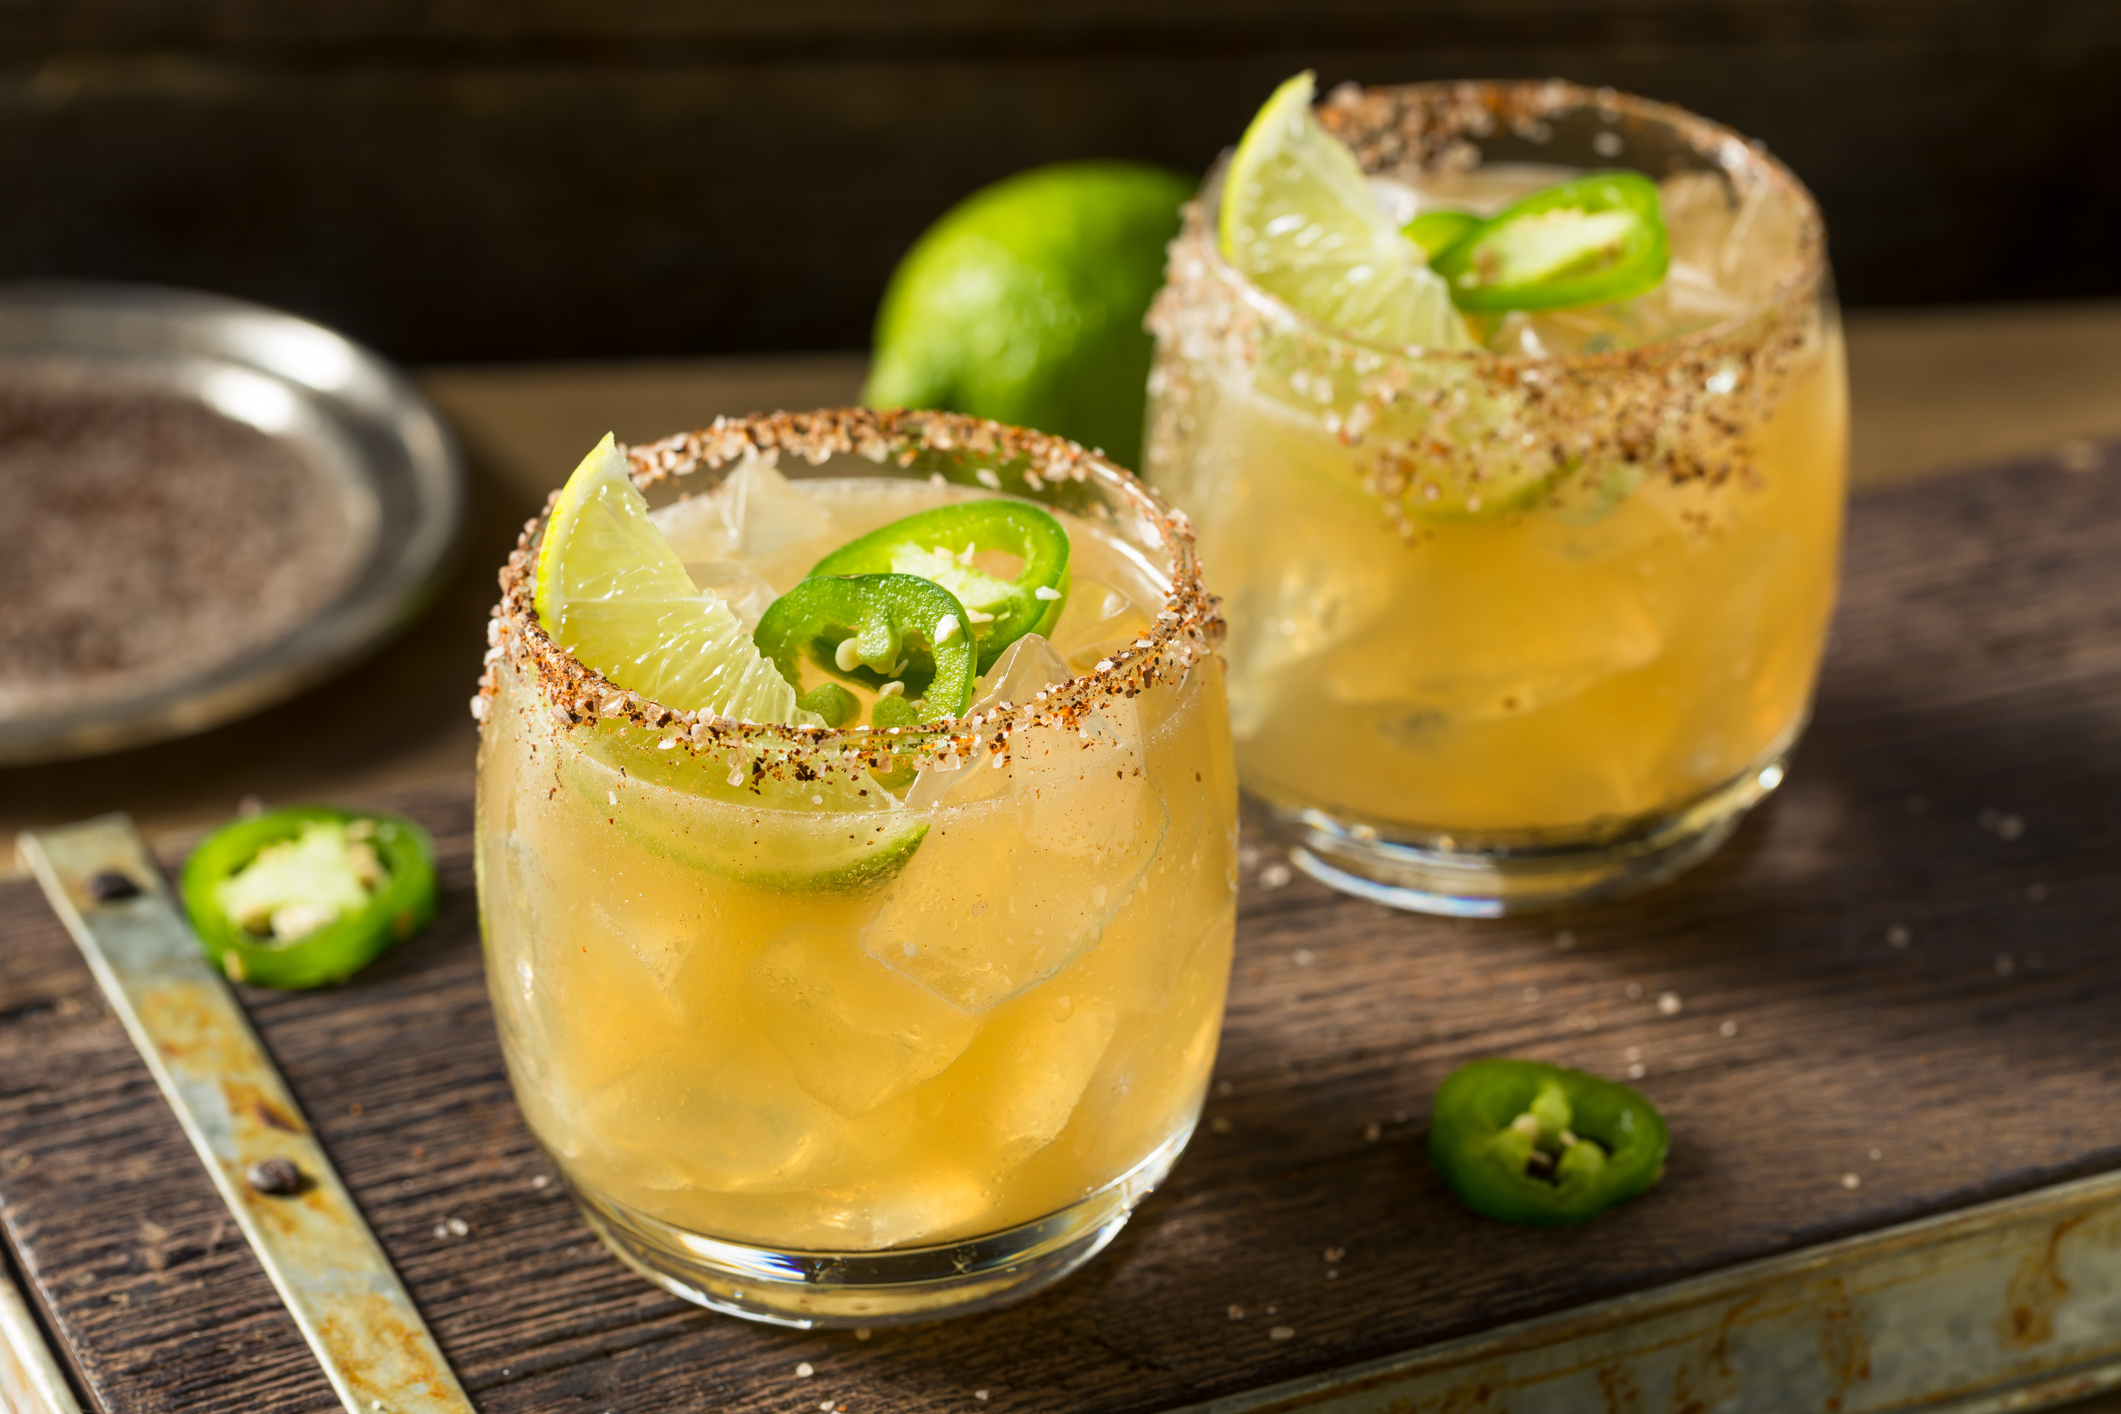 Don Julio tequila, fresh squeezed lime juice